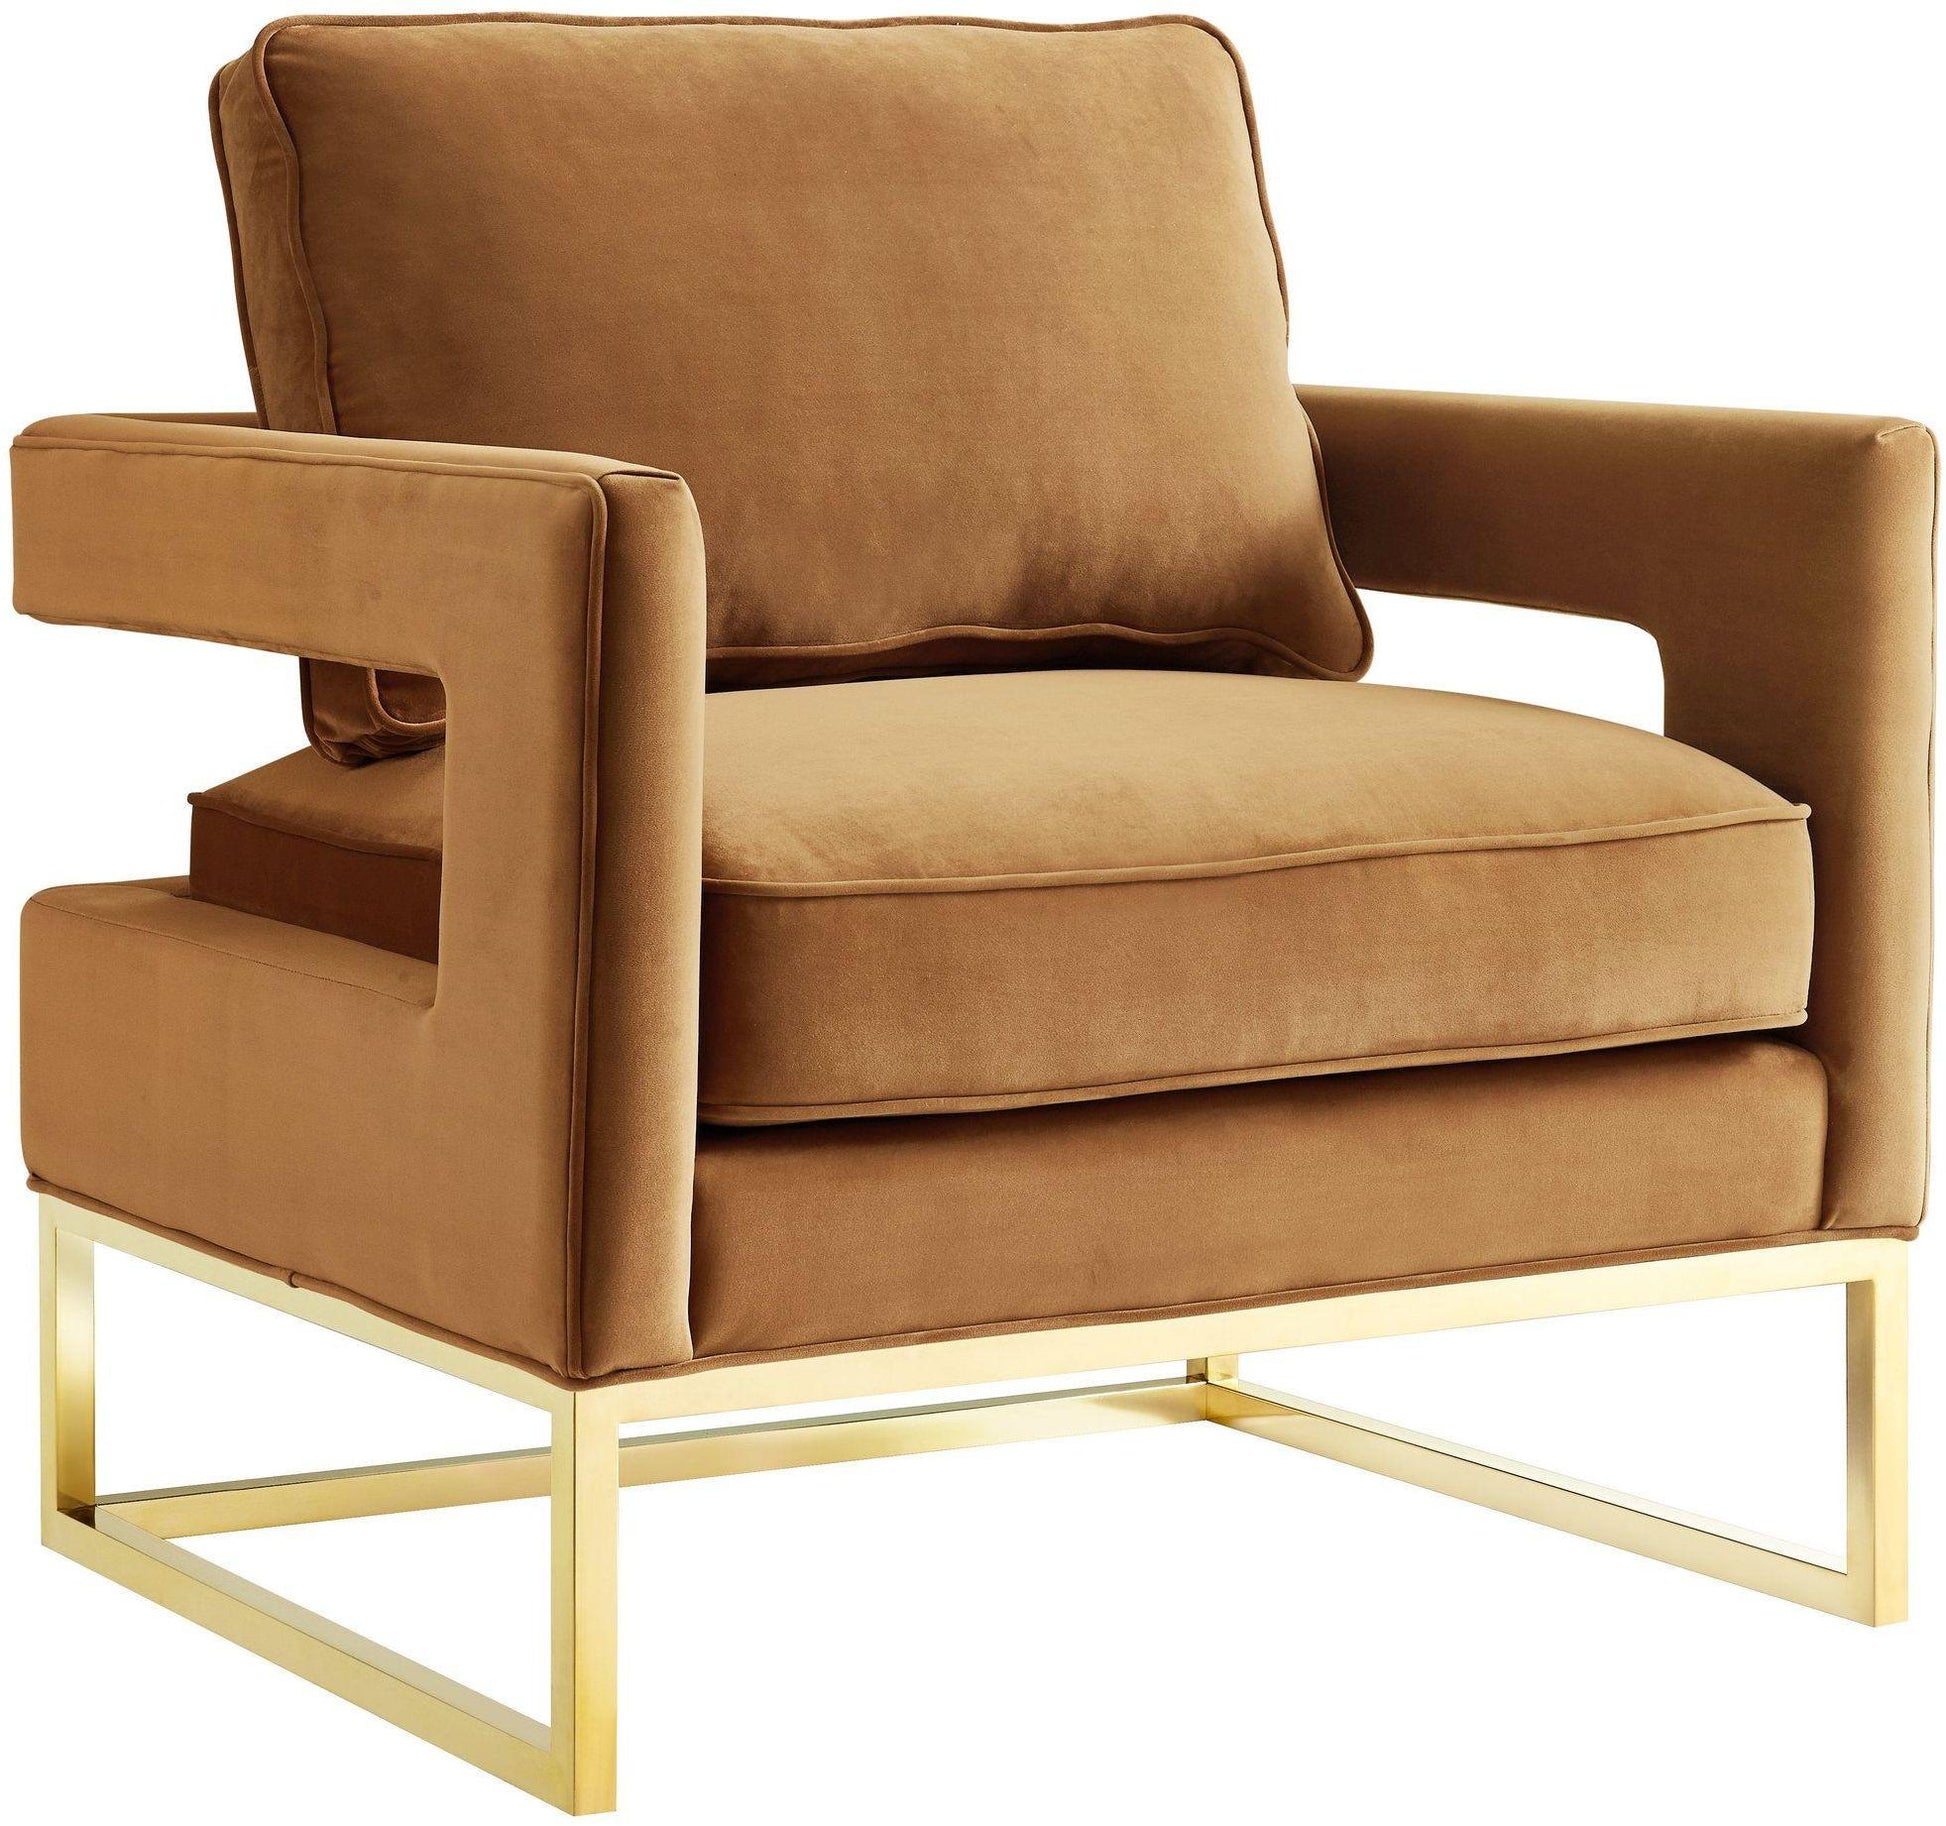 Tov Furniture Avery Cognac Velvet Chair With Polished Gold Base